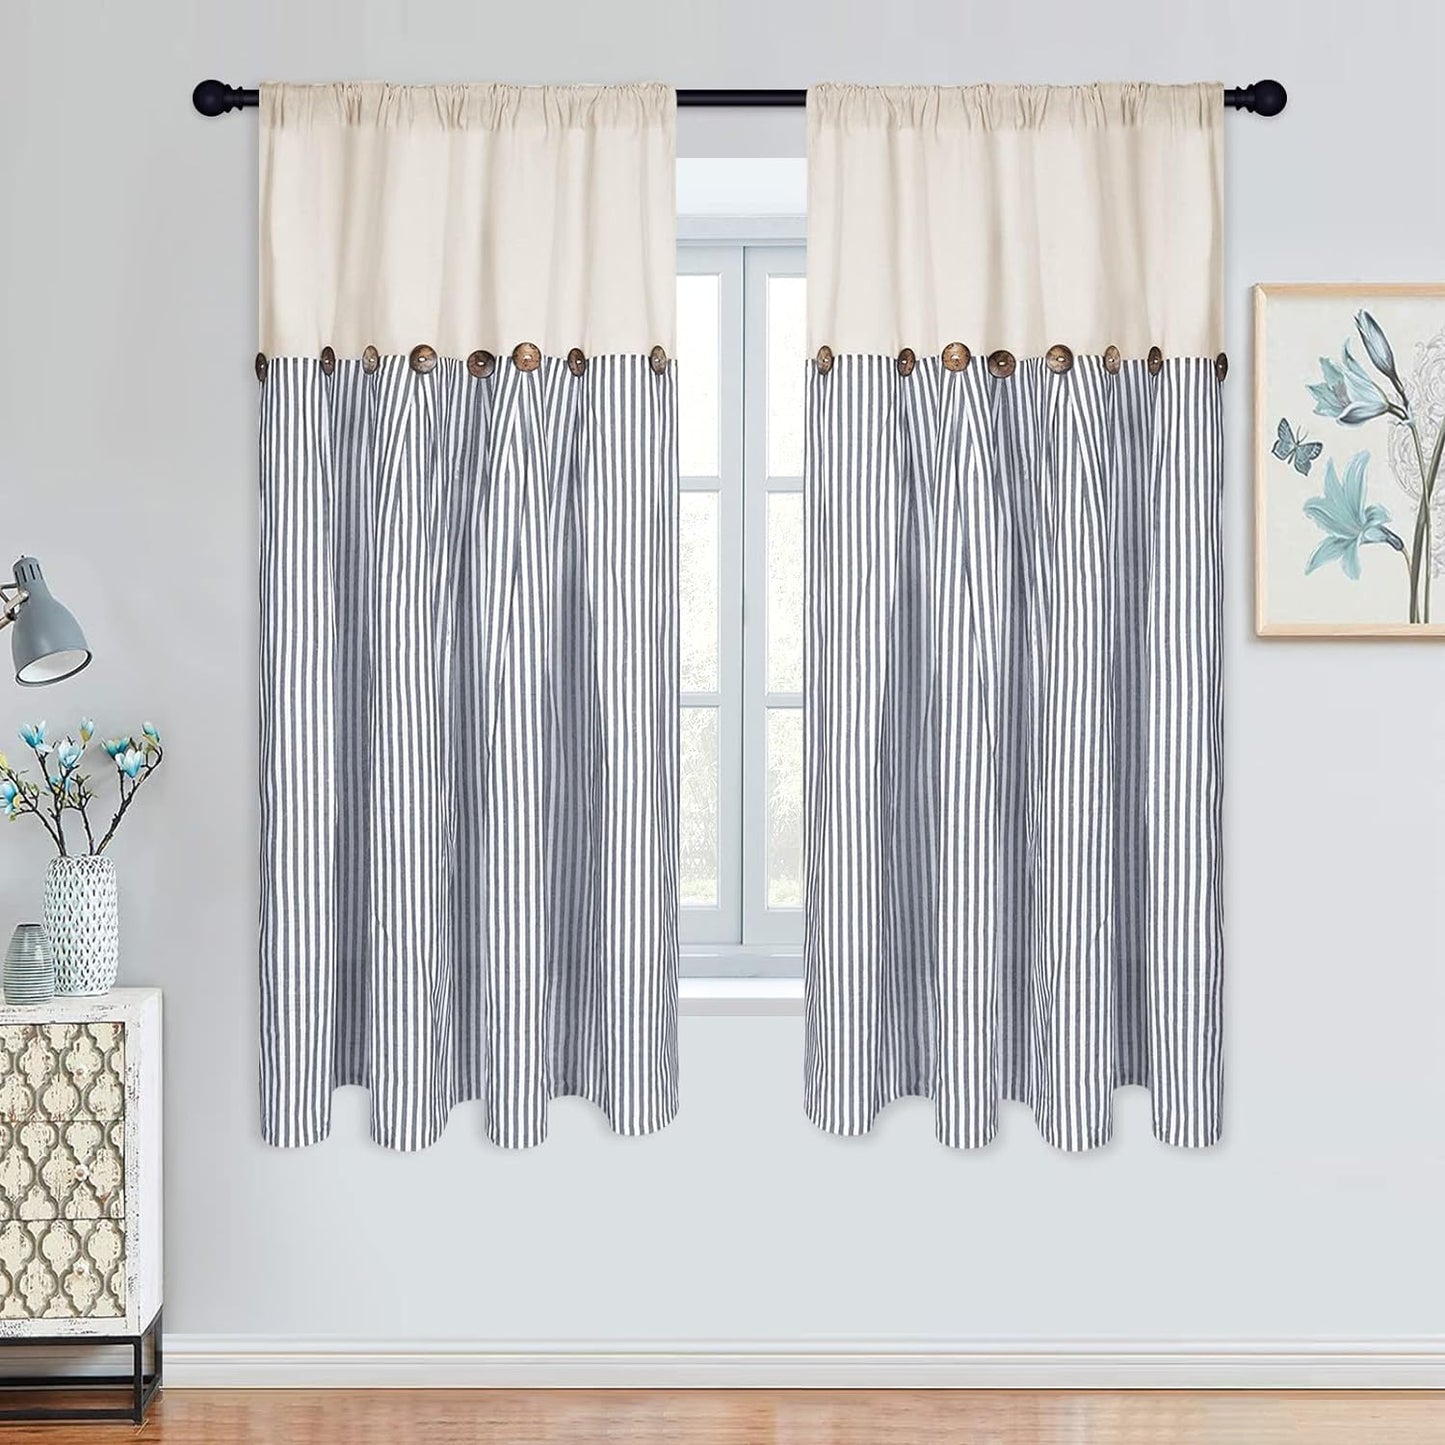 Cotton Linen Farmhouse Curtains Boho Rustic Button Curtains Natural and Dark Grey Stripe Color Block Curtain Rod Pocket & Back Tab Window Drapes for Bedroom Living Room(52 X 84 Inch, 2 Panels)  BLEUM CADE Blue Stripe W52 X L63 